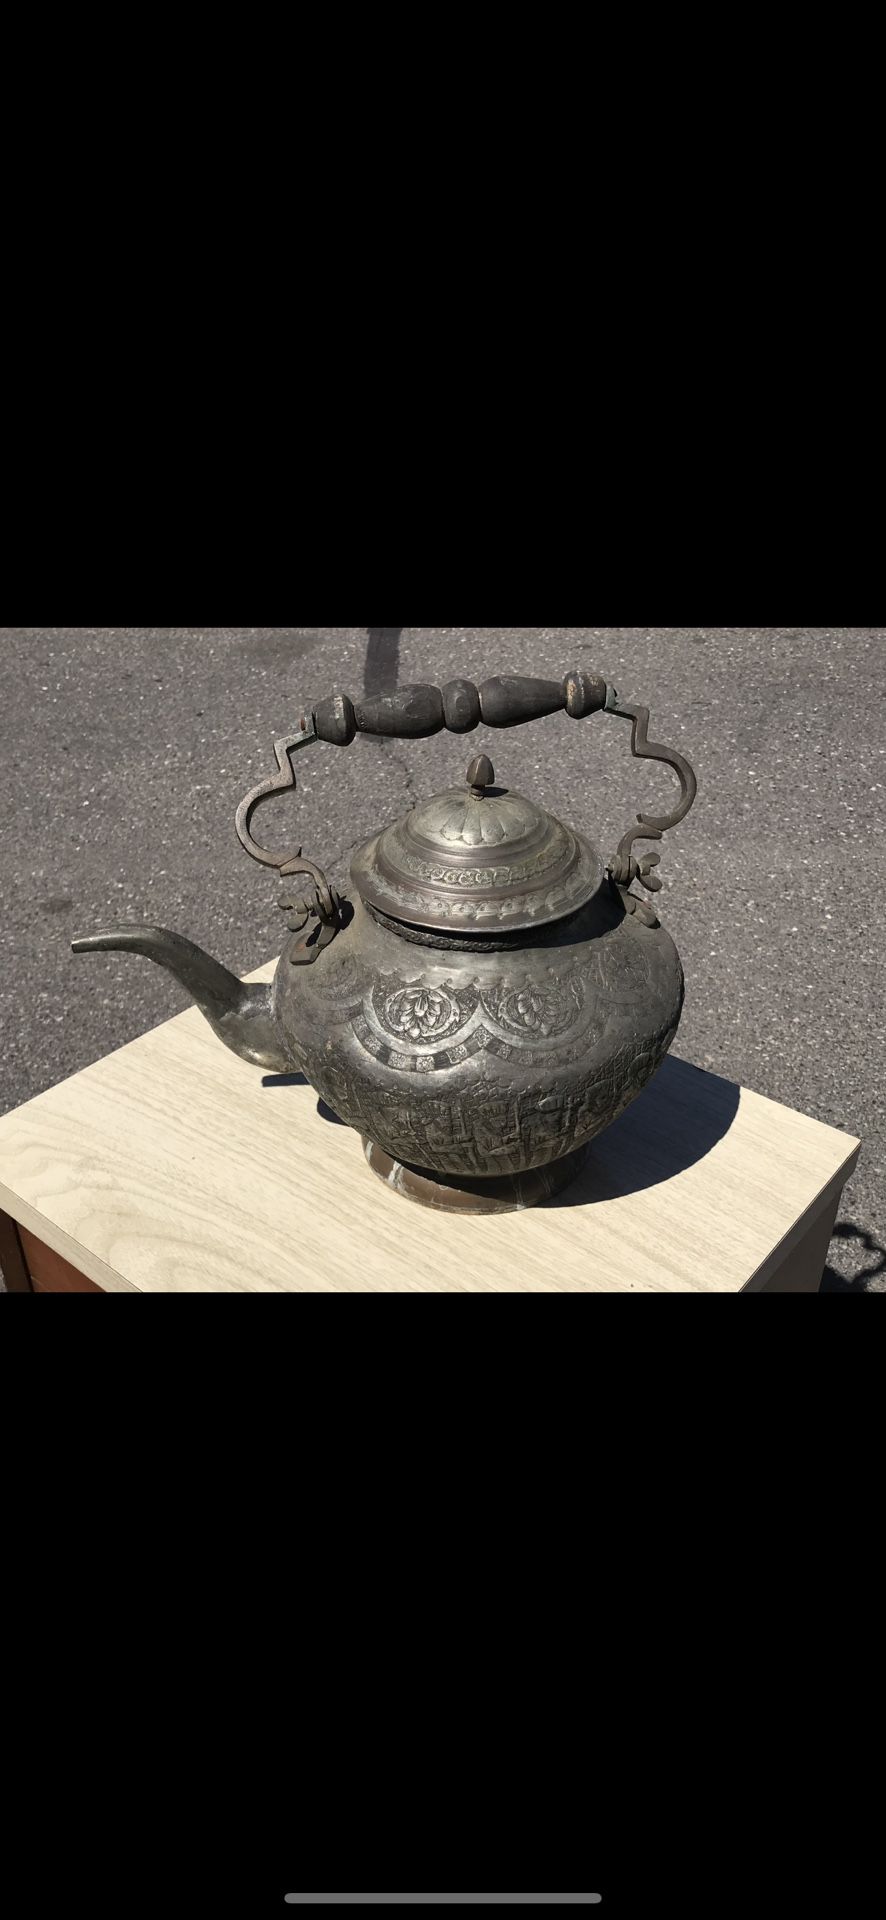 Hand Forged -kettle Pot